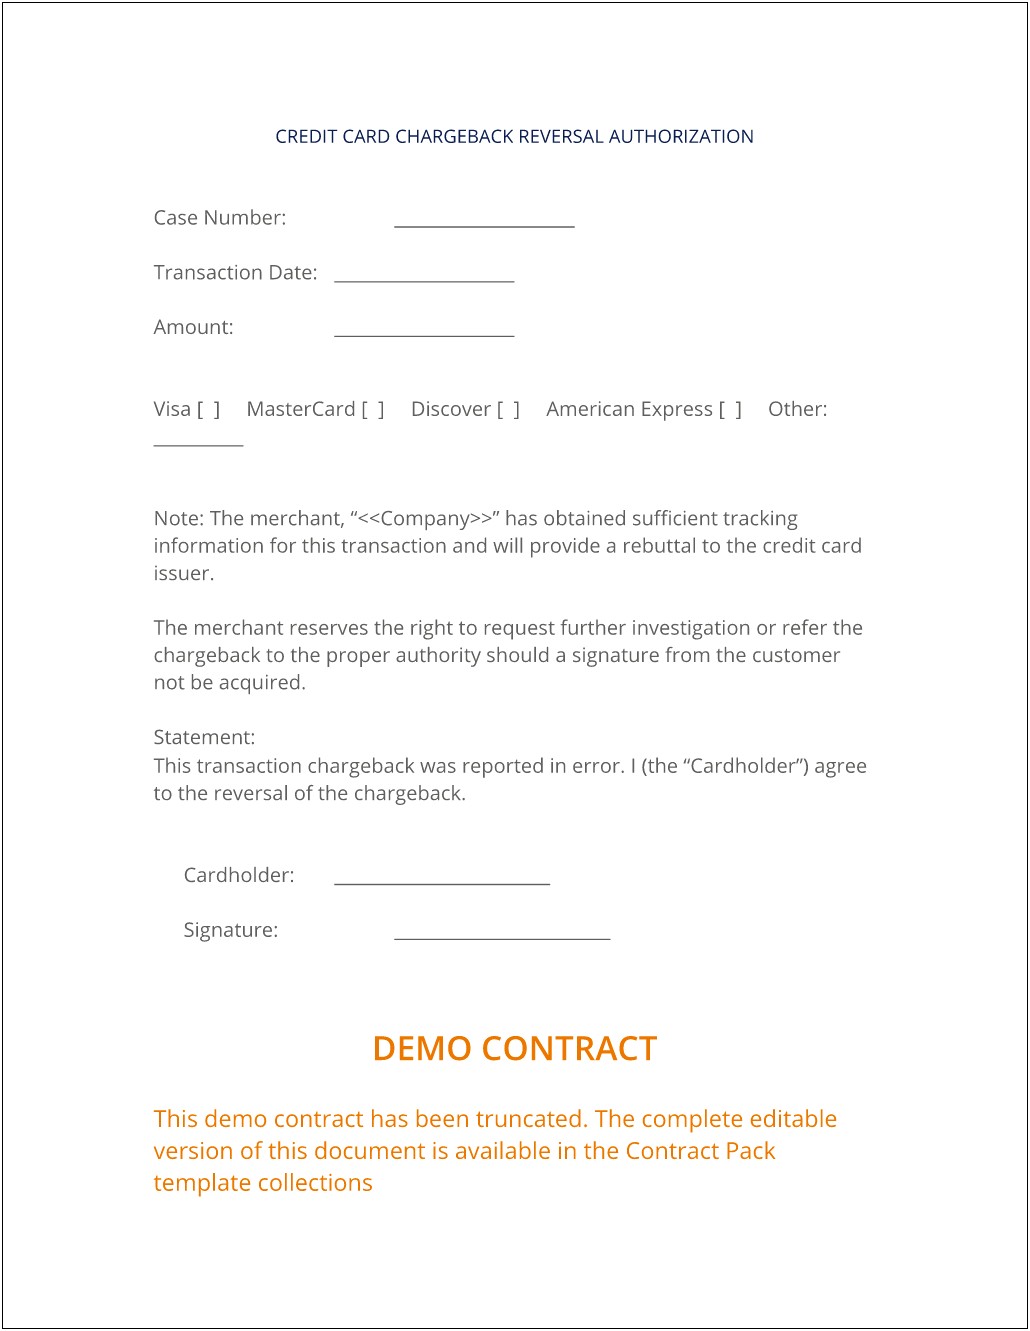 Cardholder Agreement Of The Transaction Made Letter Templates